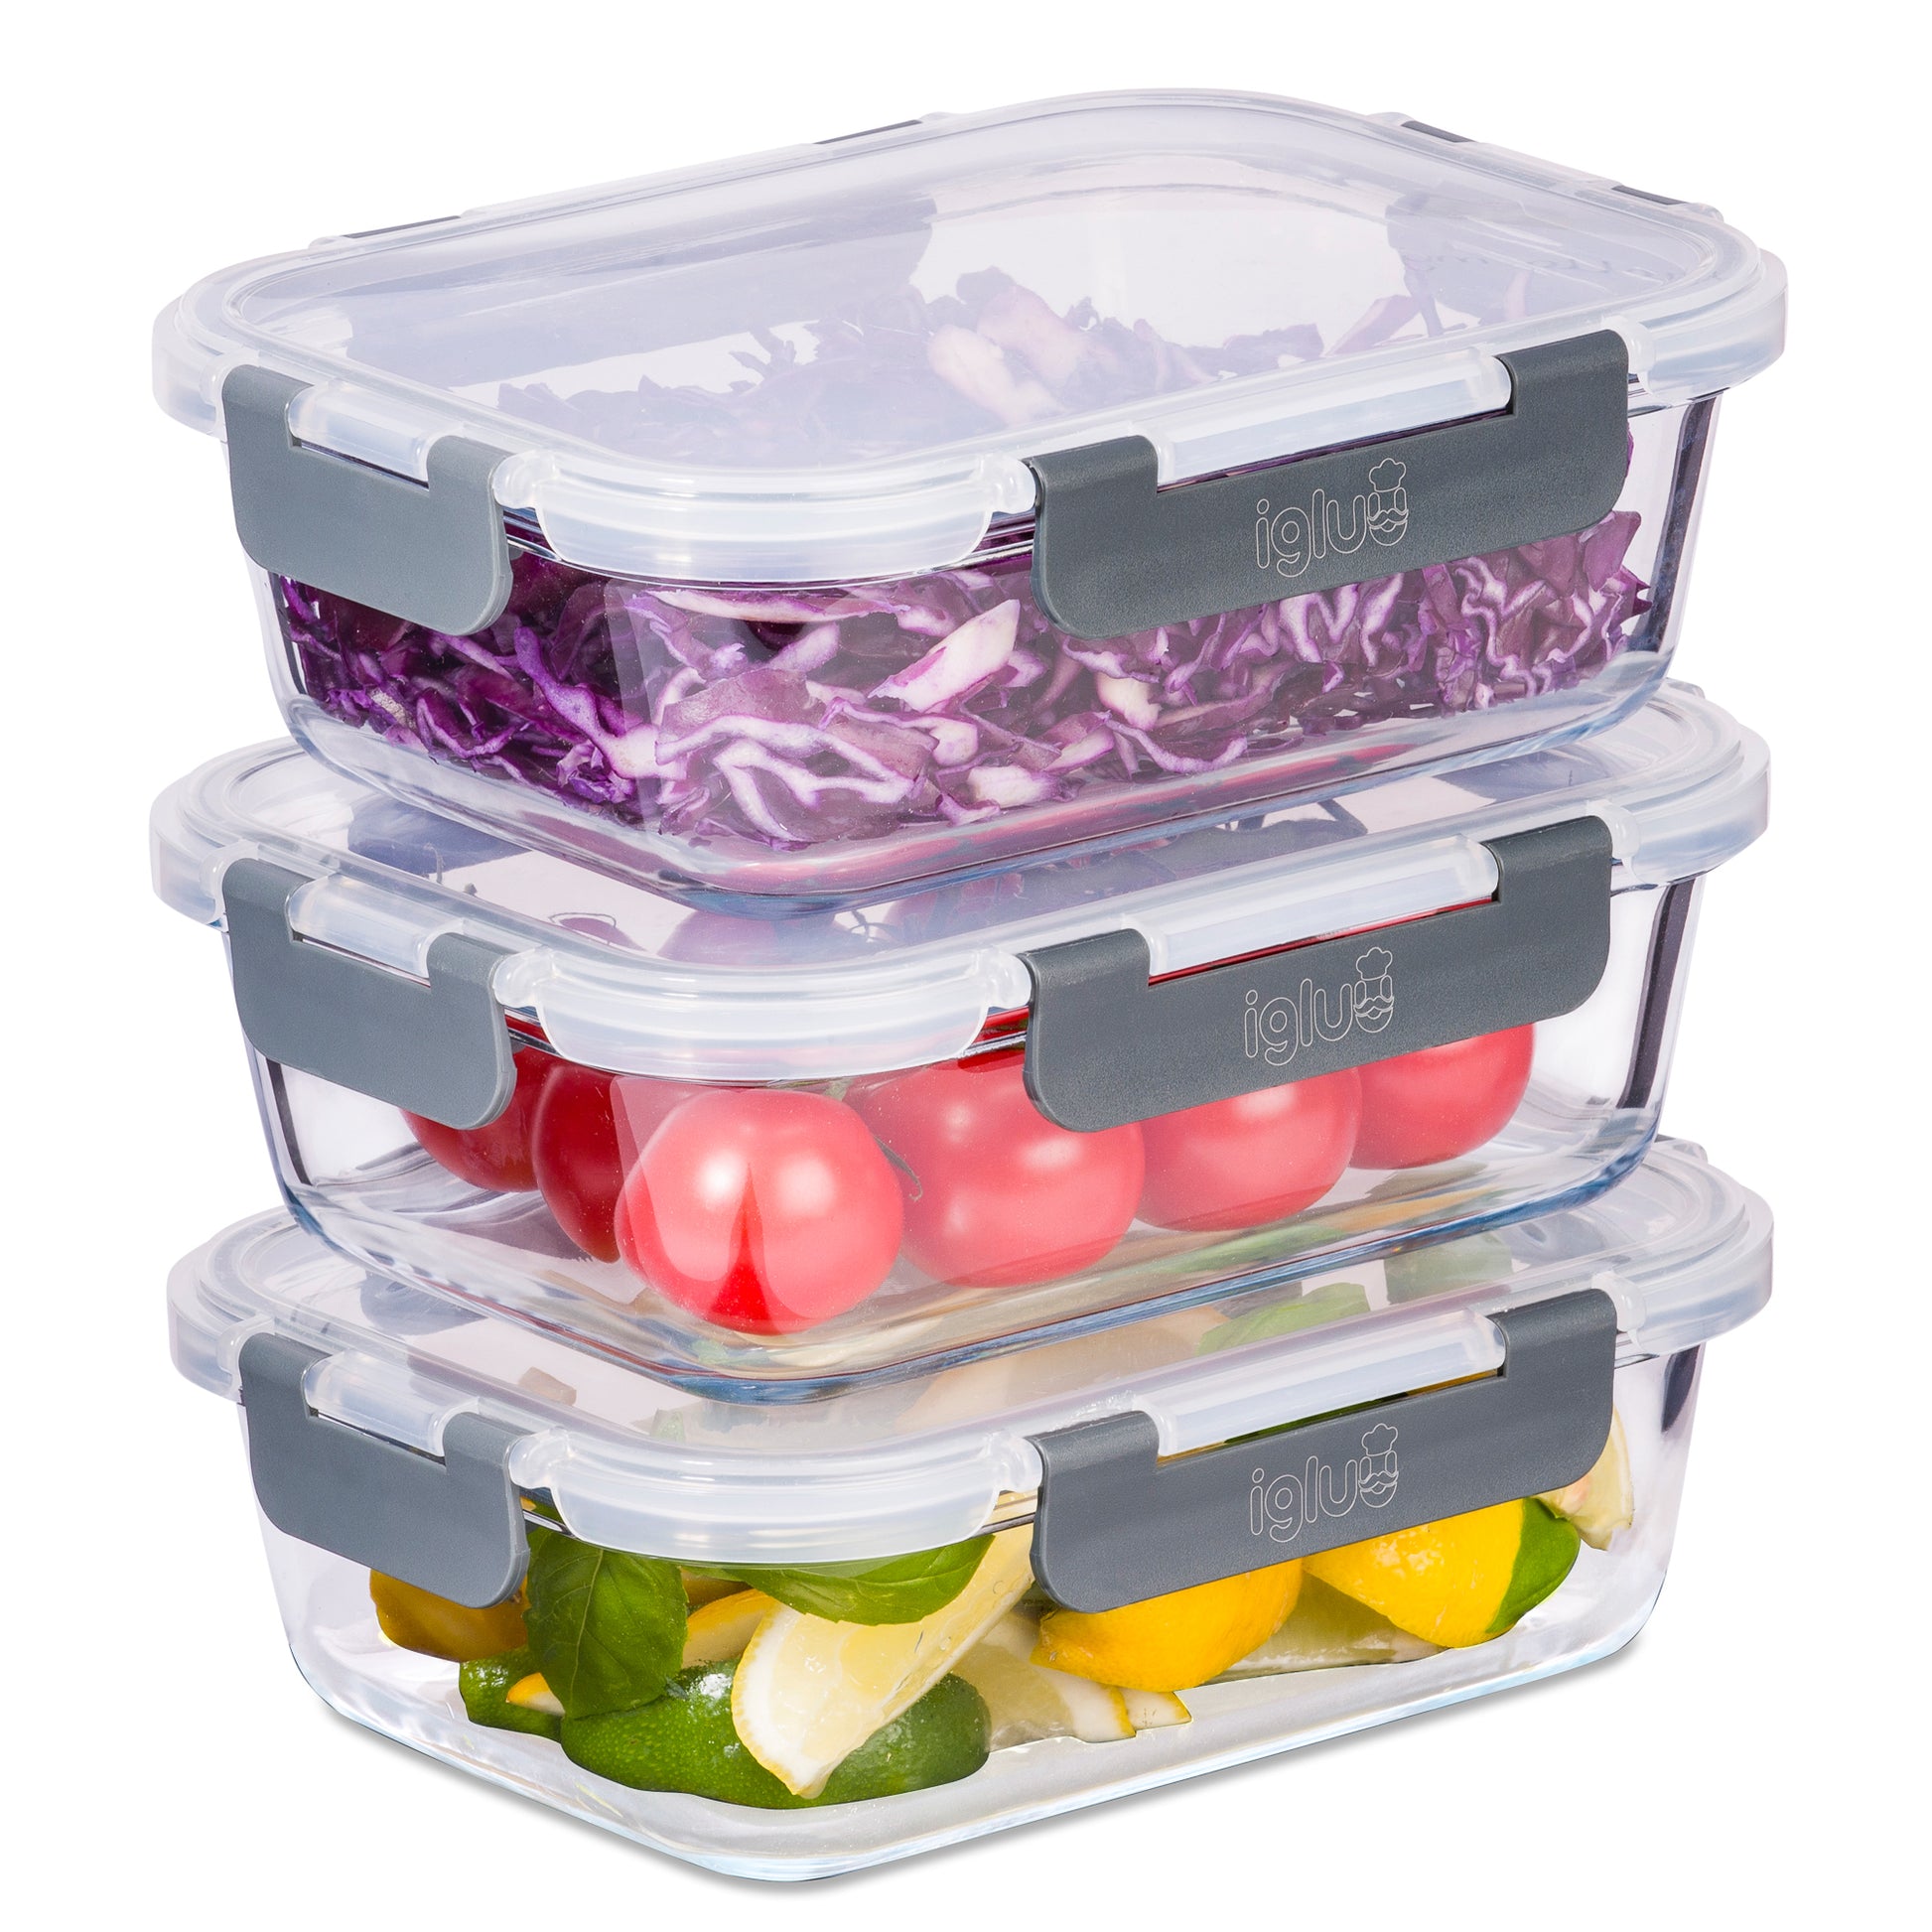 IGLUU Reusable Meal Prep Food Containers with Air Tight Lids 